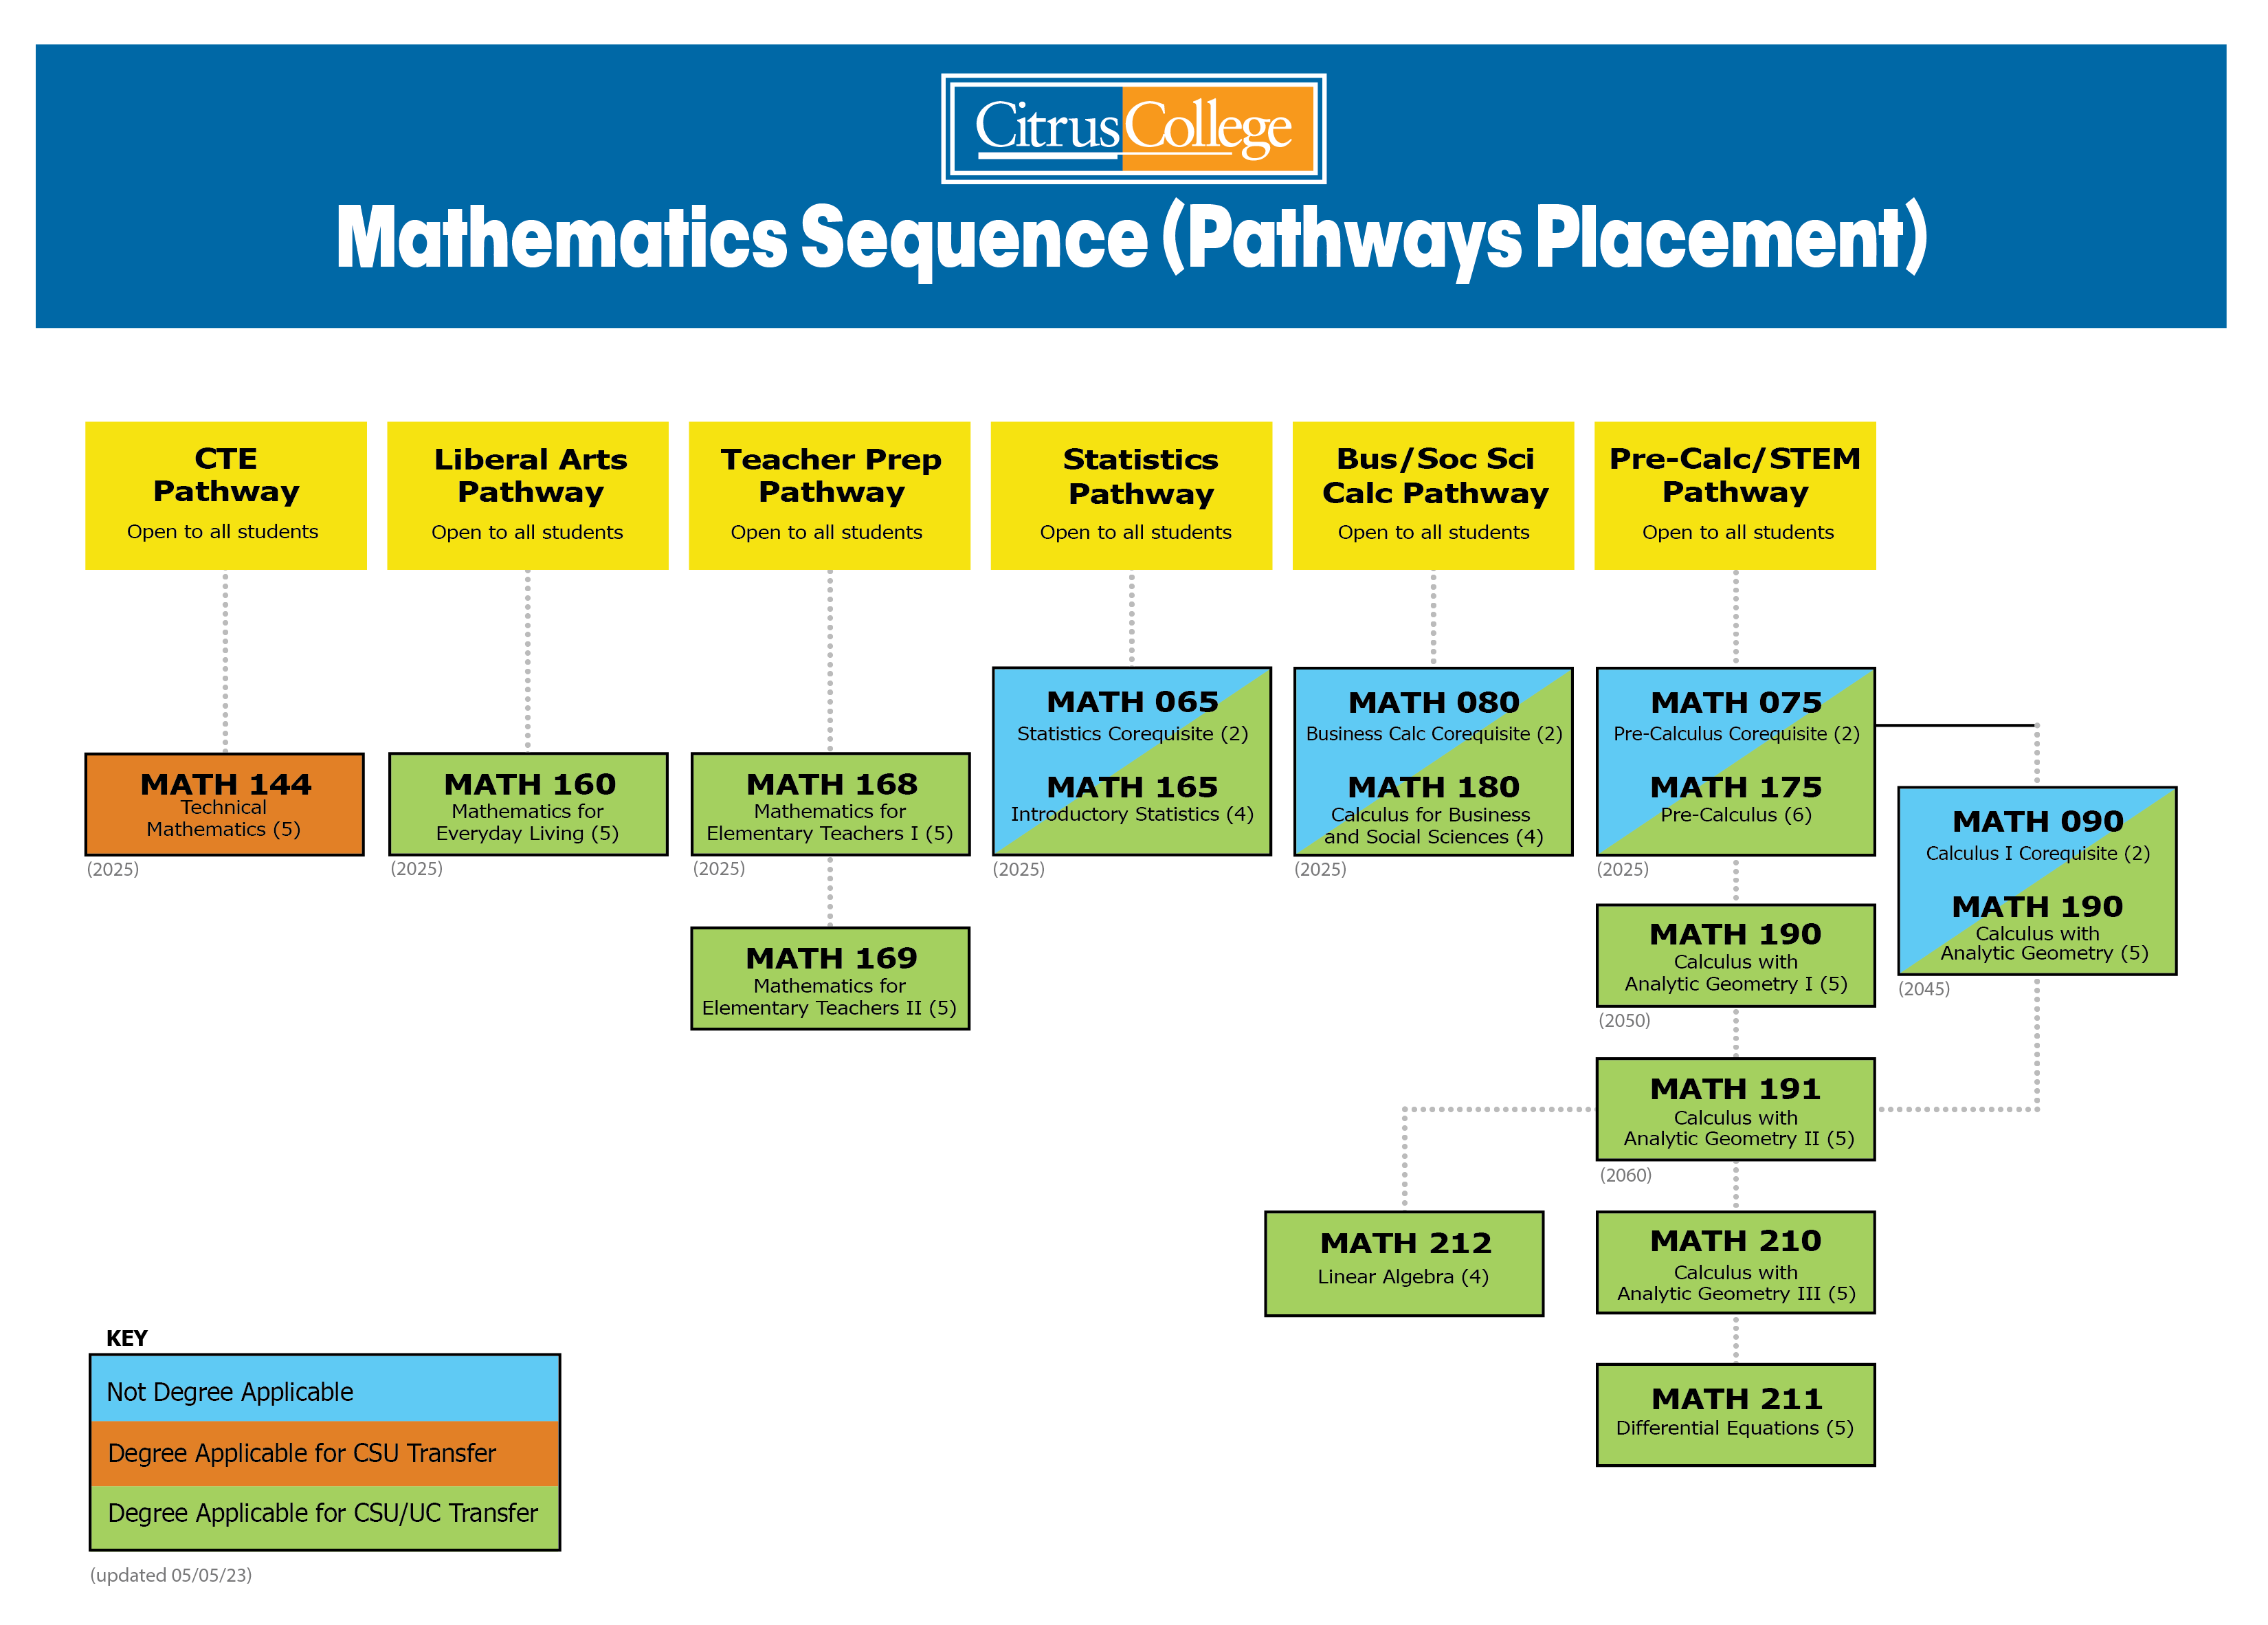 Citrus College Math Sequence Placement Chart, Pathways